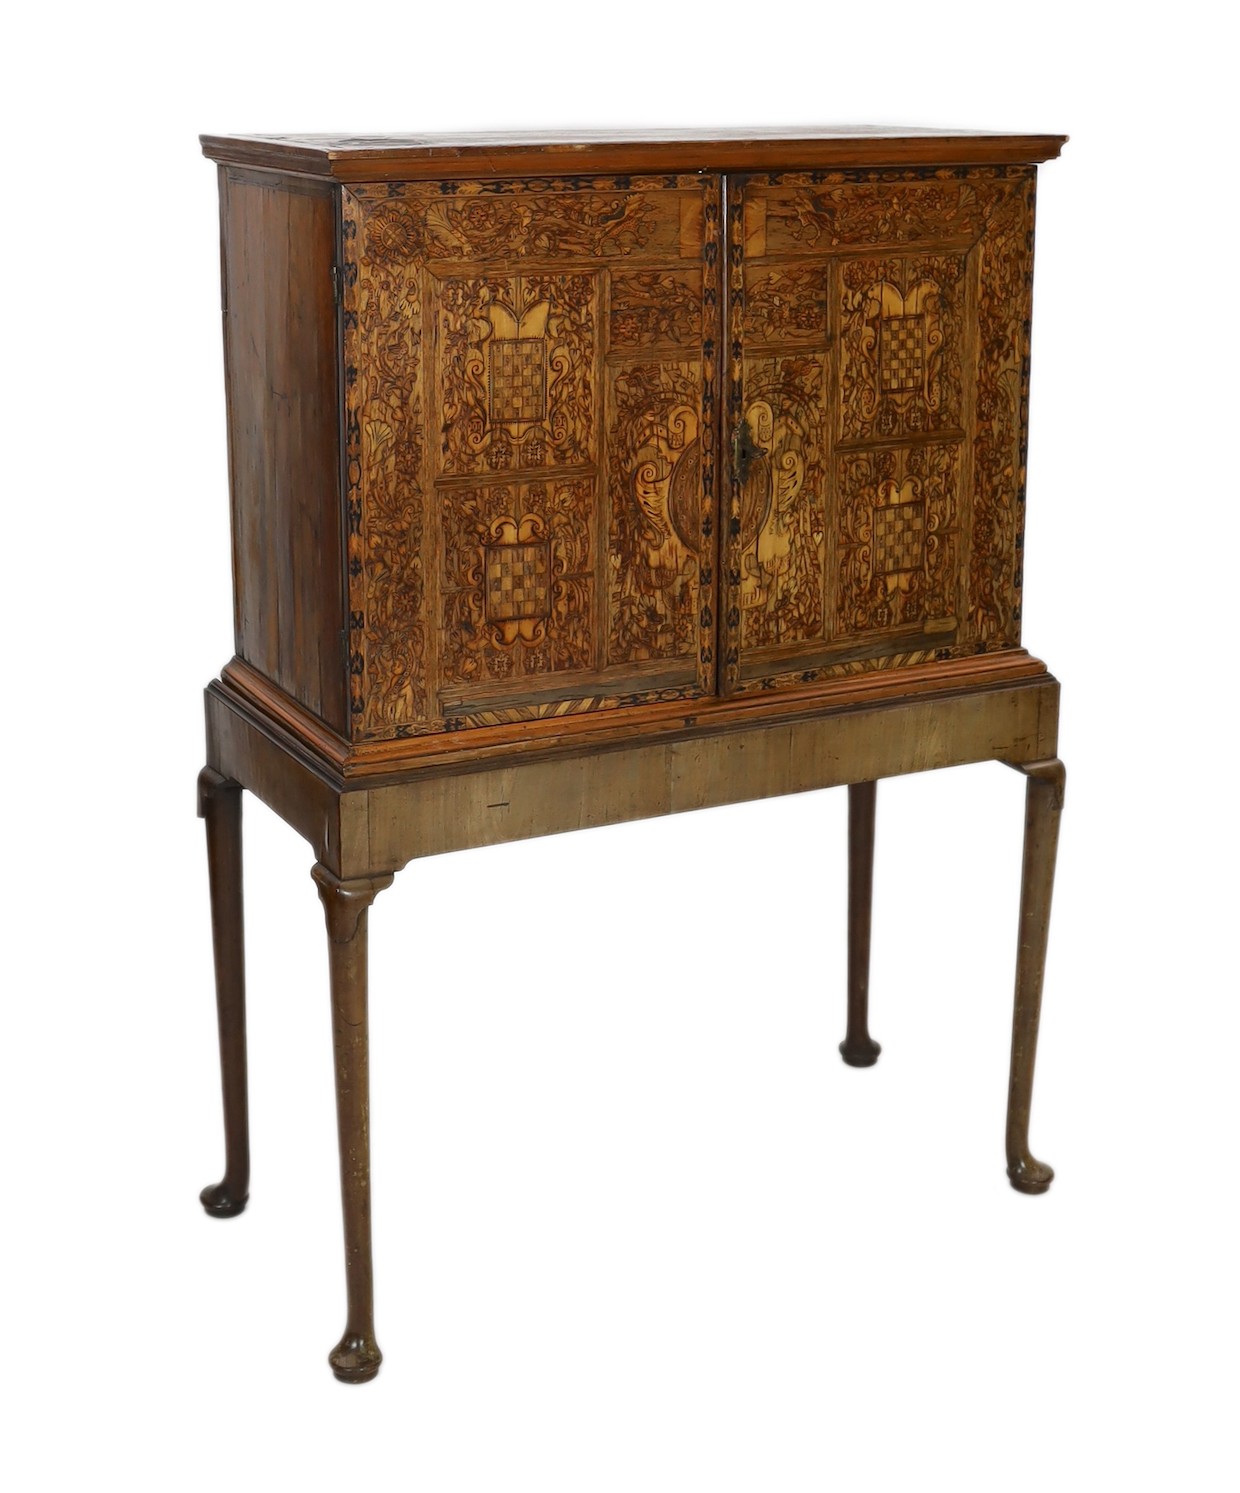 A 17th century and later South German walnut and marquetry cabinet on later stand, with moulded